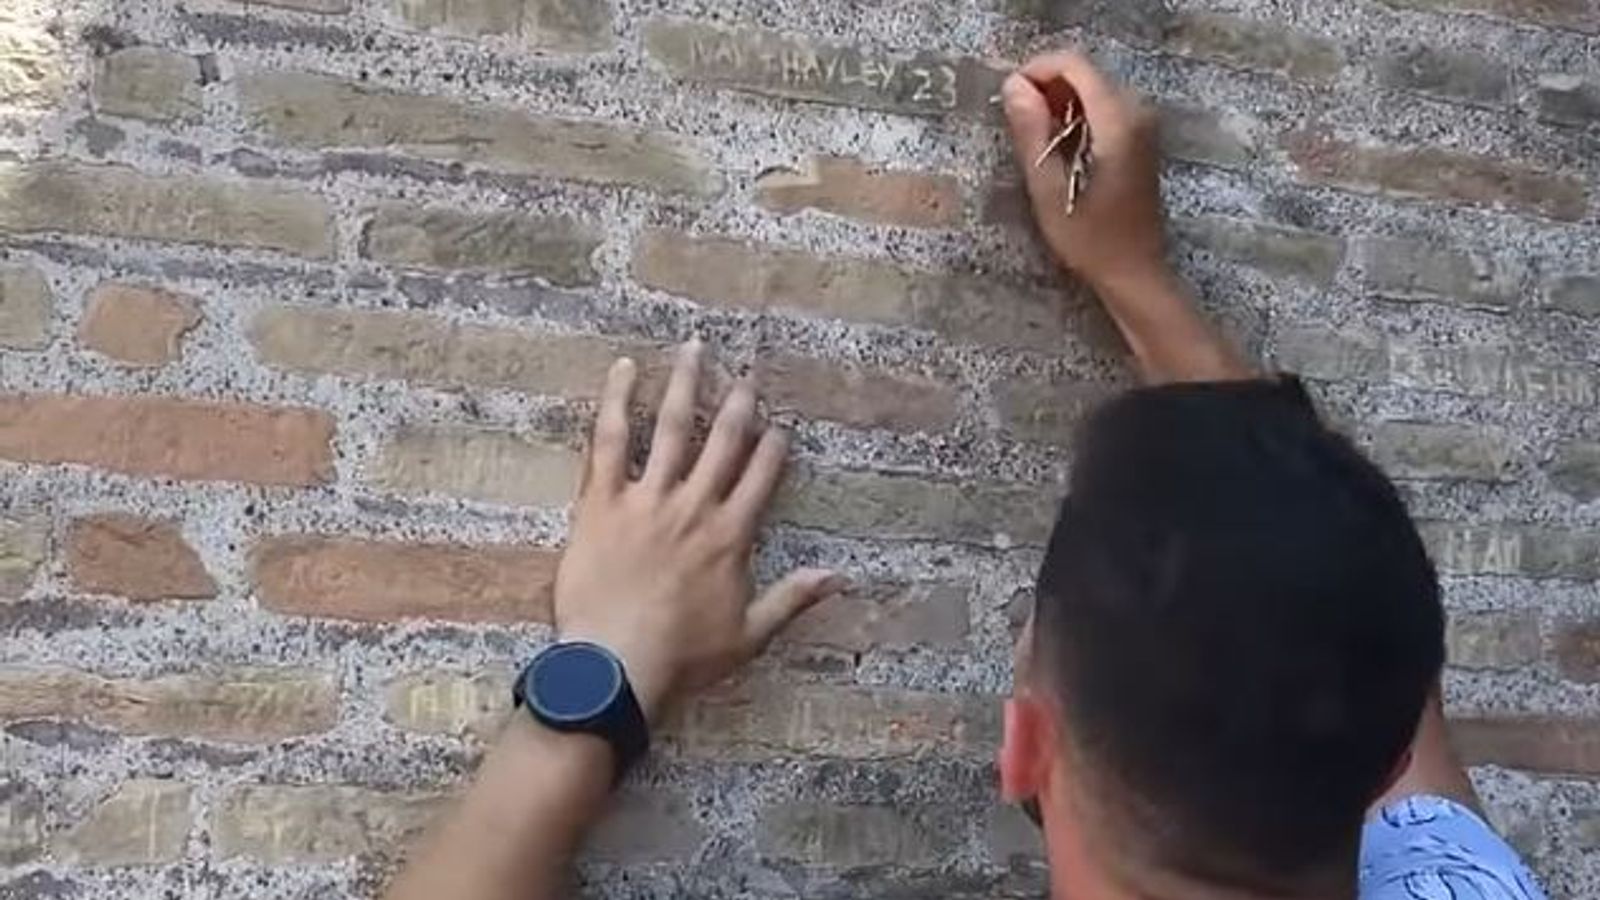 Anger in Italy as tourist filmed carving names into the Colosseum